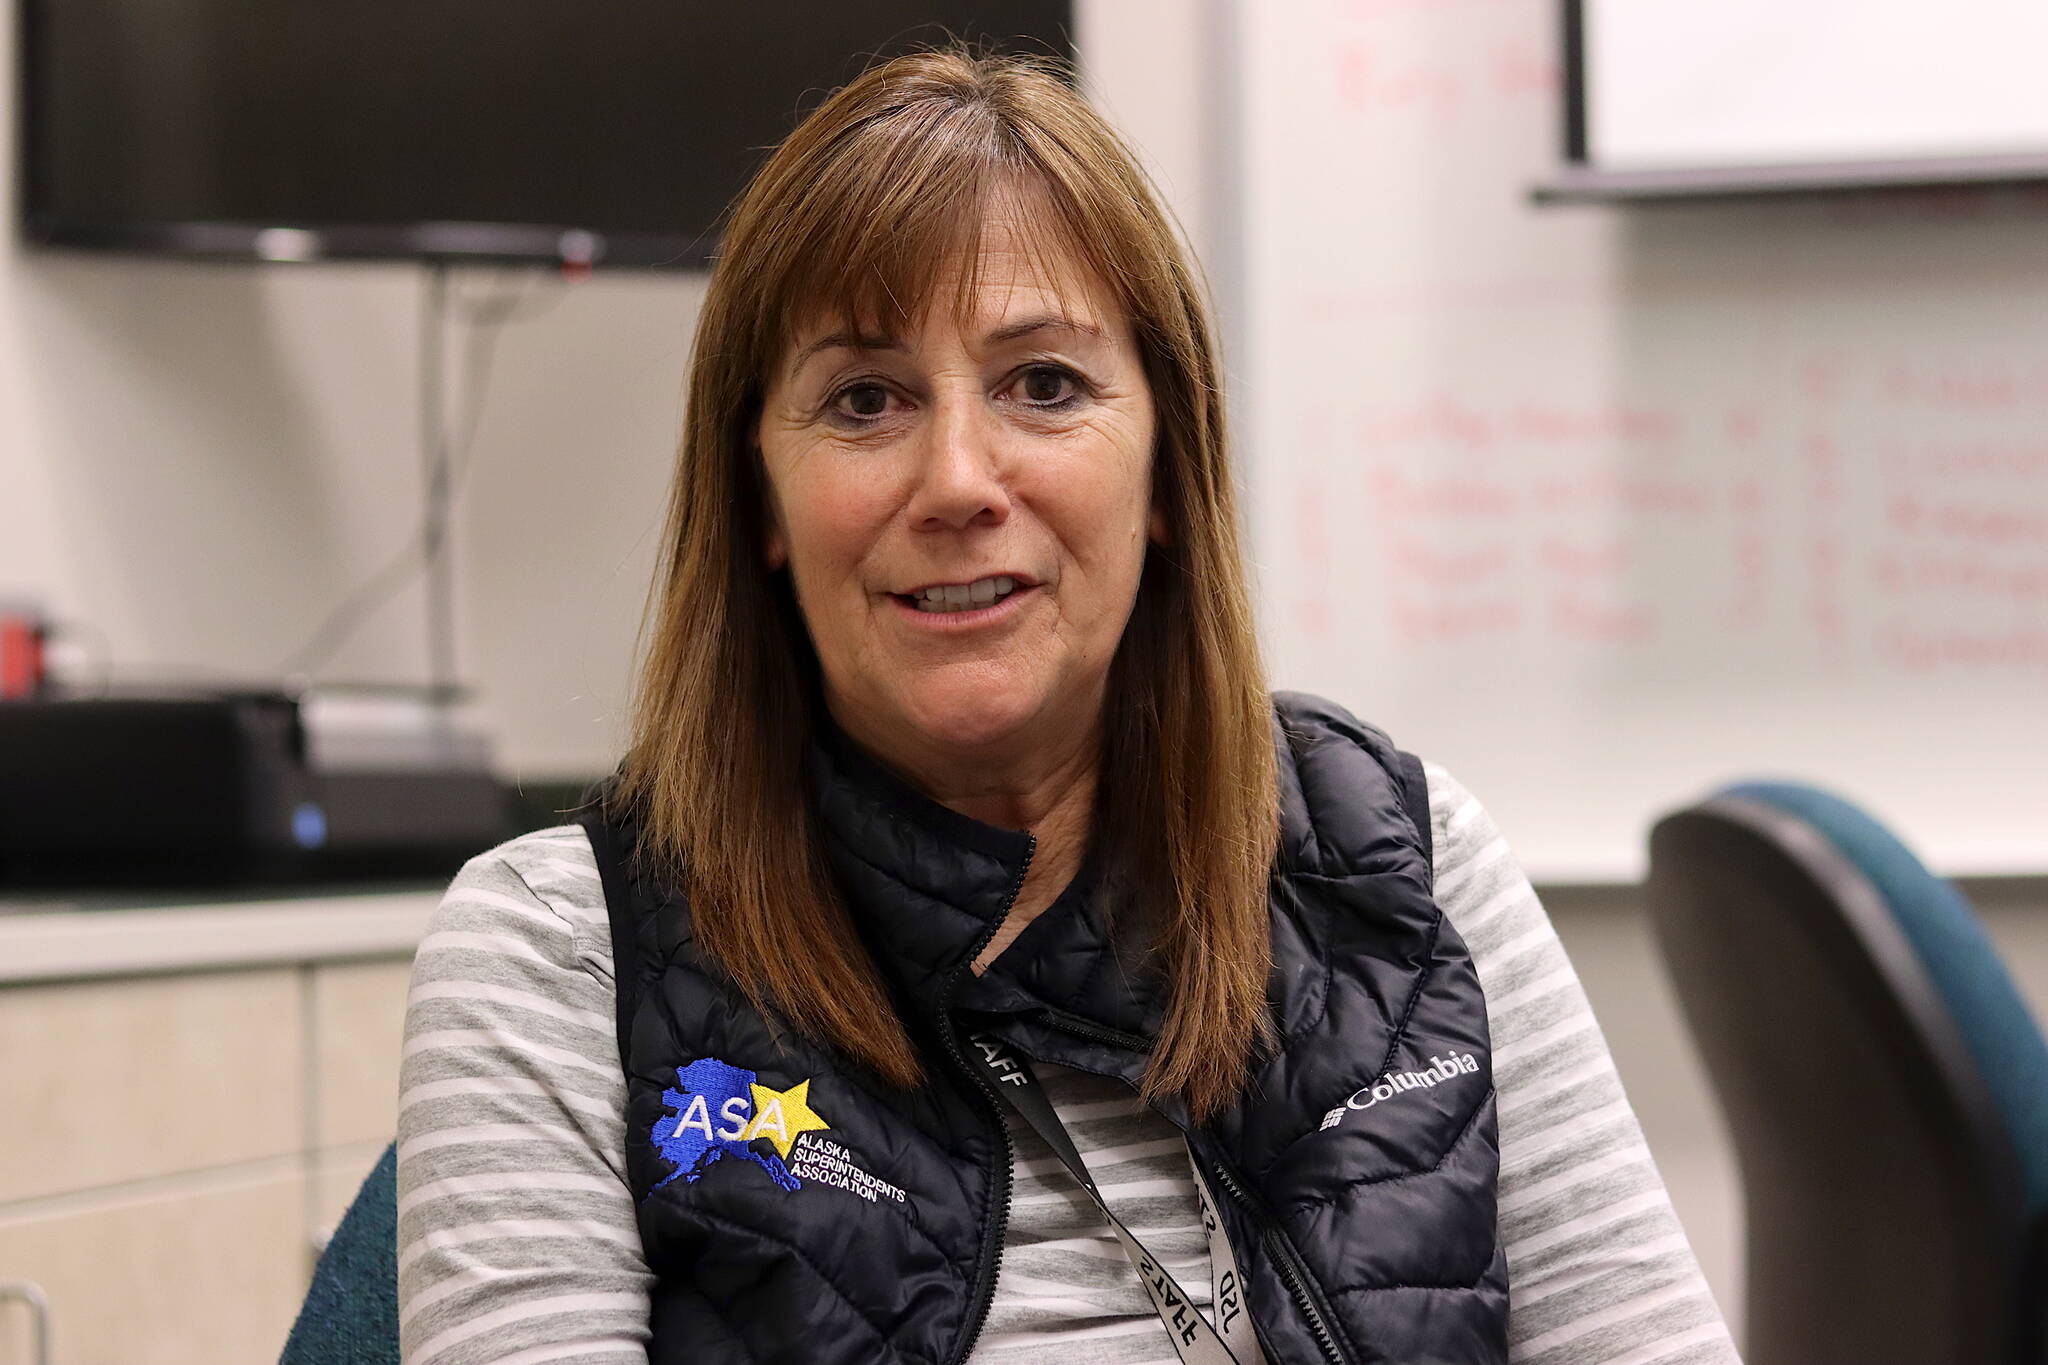 Bridget Weiss discusses her 39-year career in public education on Thursday, her second-to-last day as superintendent of the Juneau School District, in a break room at Thunder Mountain High School. (Mark Sabbatini / Juneau Empire)